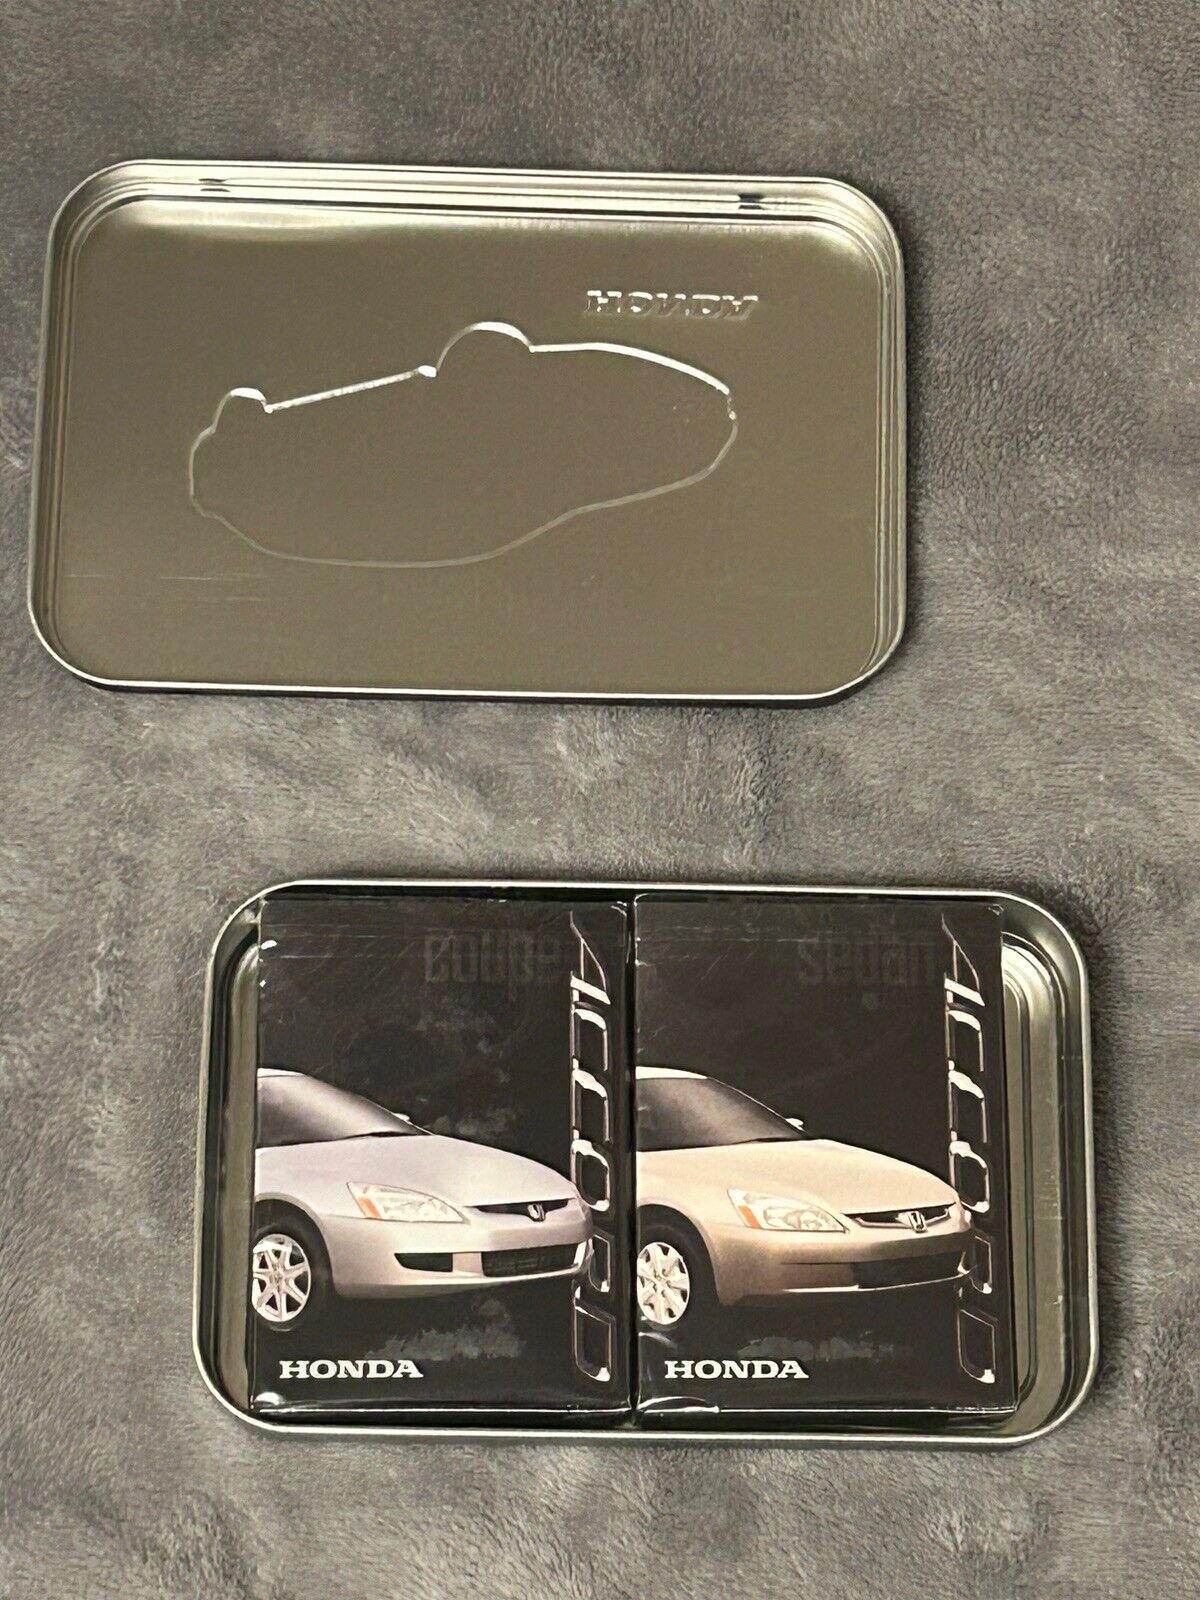 2003 Honda Accord Limited Edition Collectors Tin 2 Sets of Sealed Playing Cards